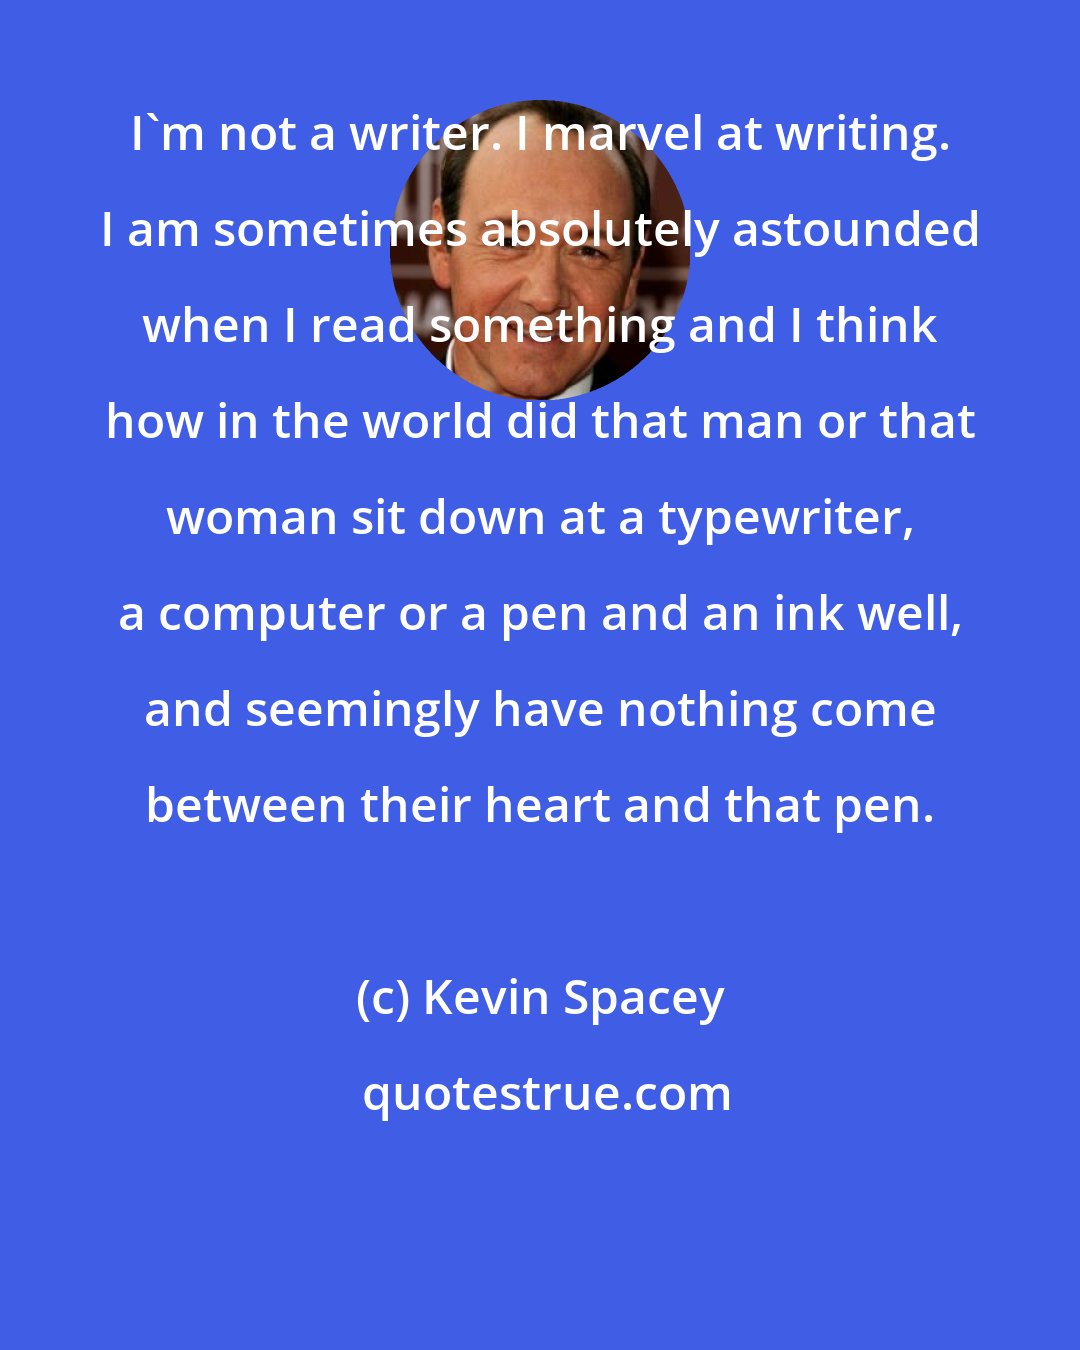 Kevin Spacey: I'm not a writer. I marvel at writing. I am sometimes absolutely astounded when I read something and I think how in the world did that man or that woman sit down at a typewriter, a computer or a pen and an ink well, and seemingly have nothing come between their heart and that pen.